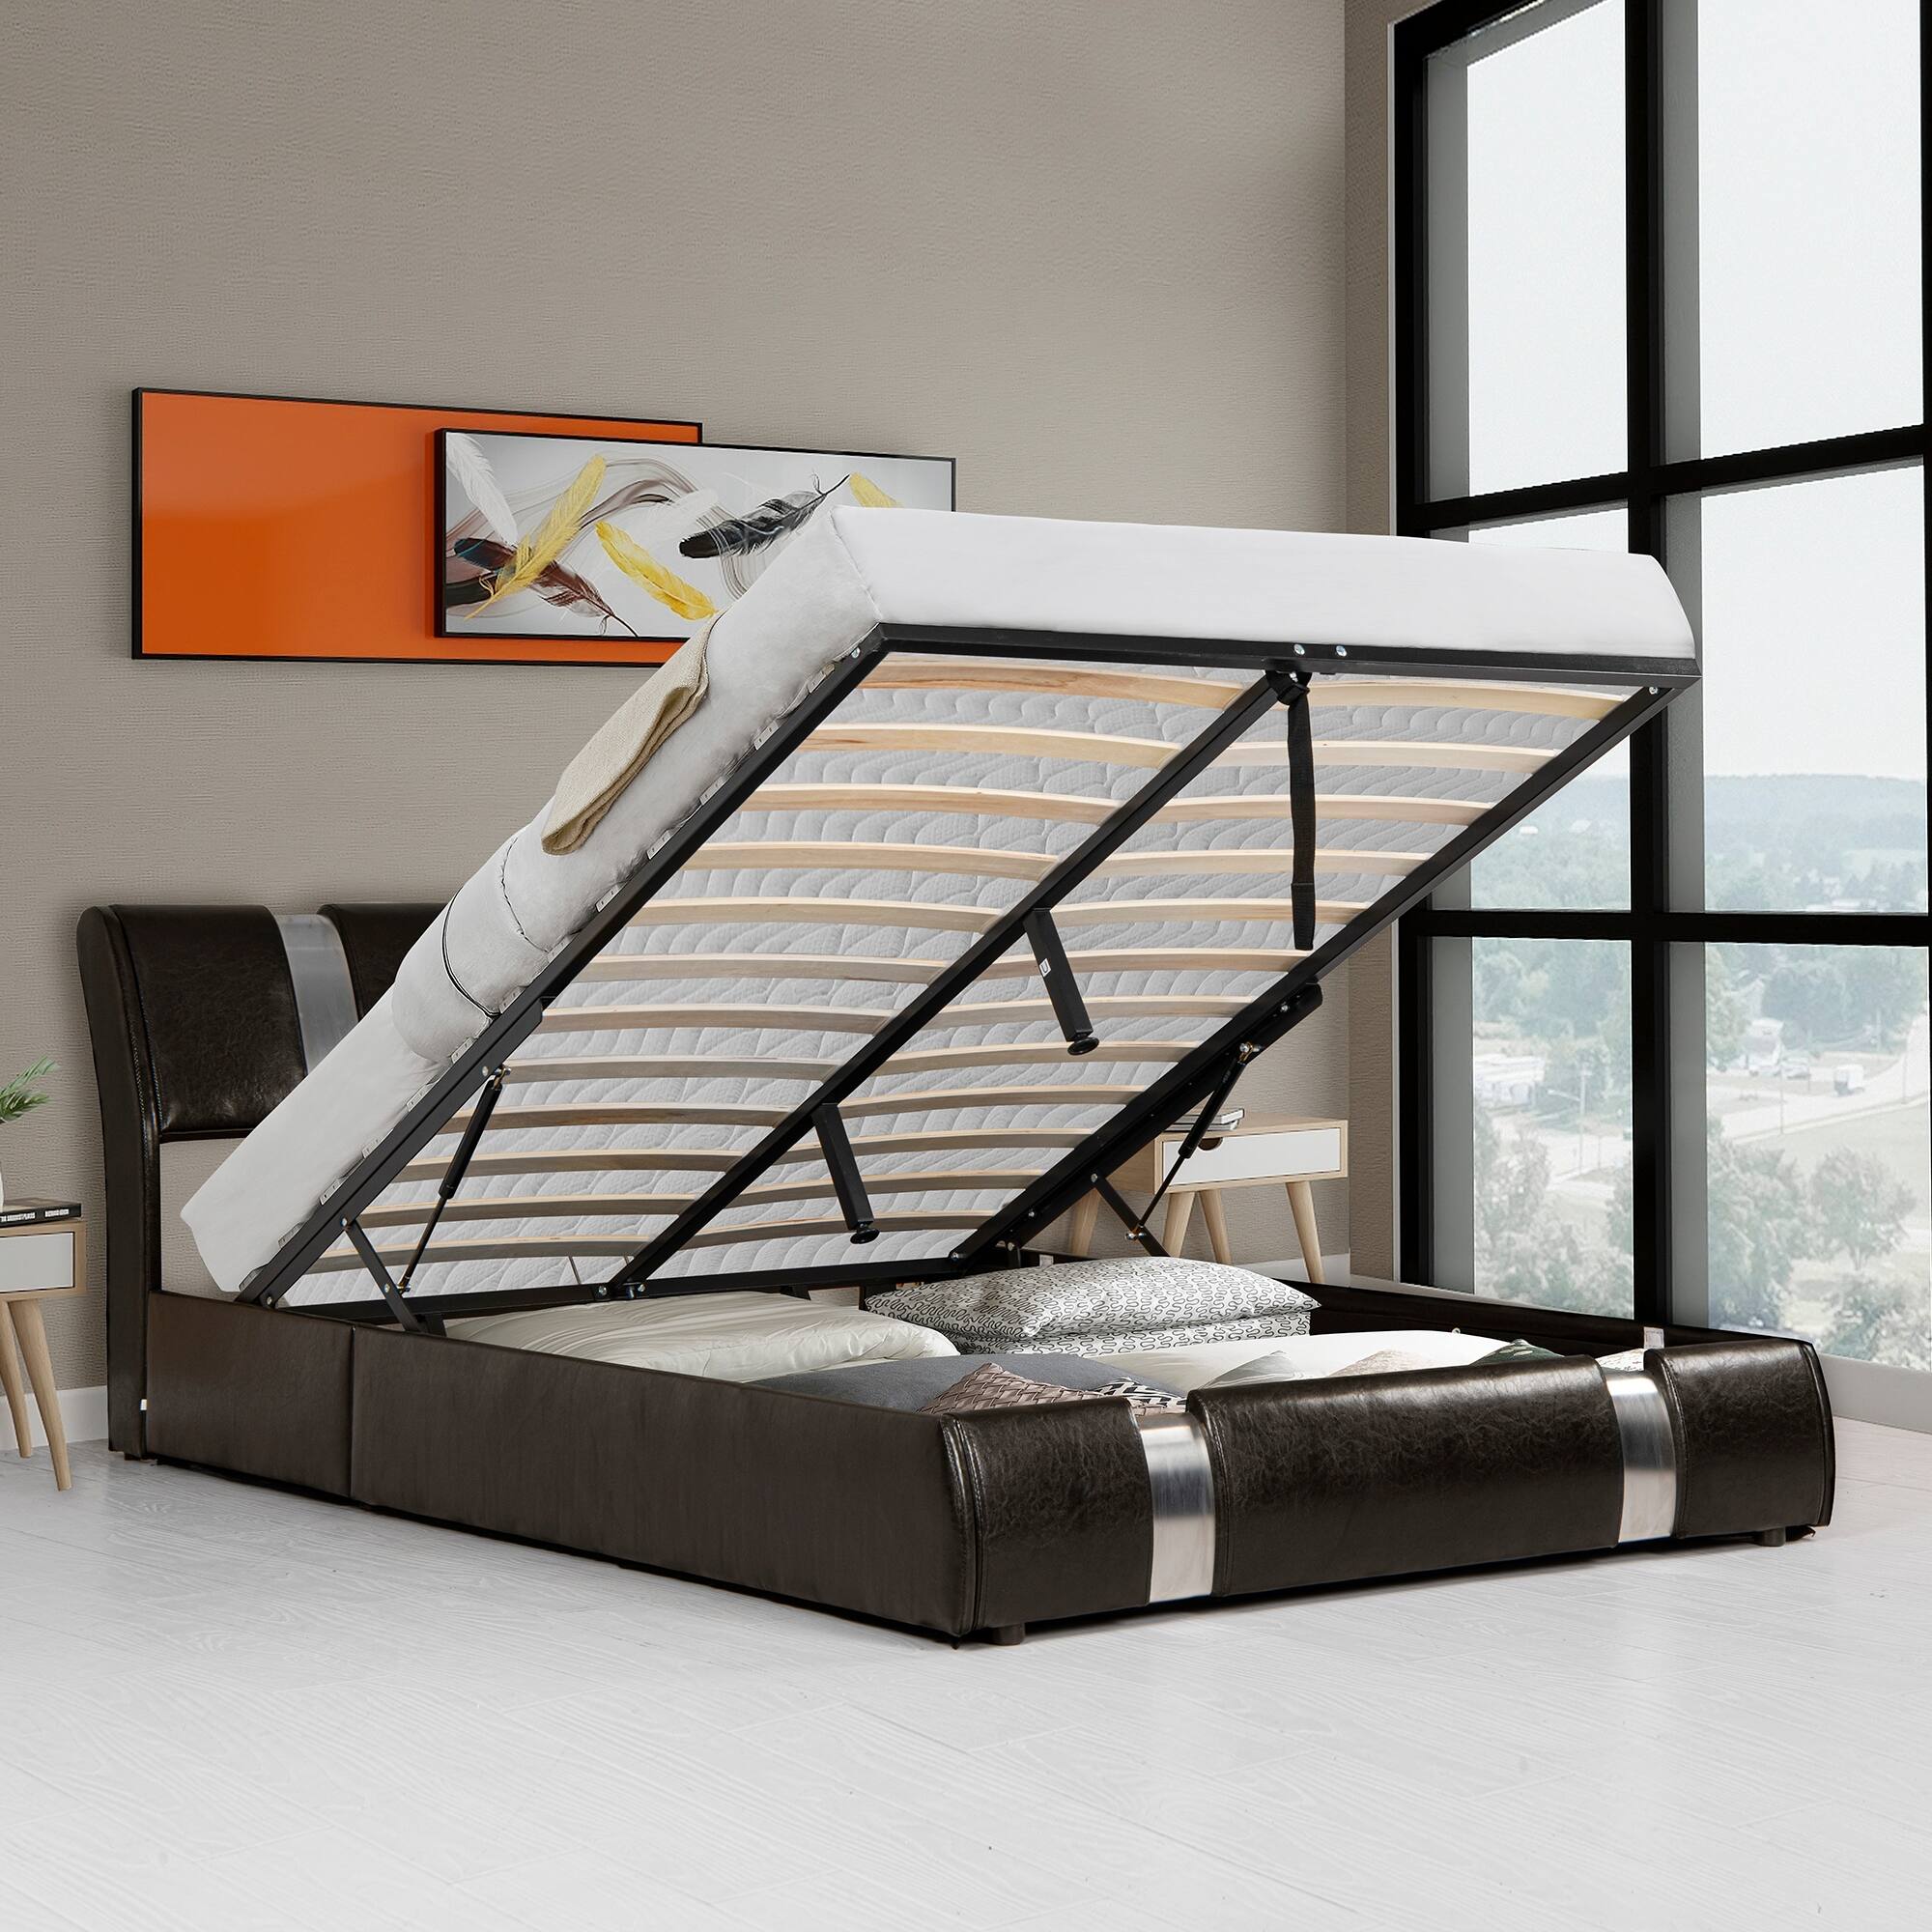 Full Size Lift Up Storage Bed Frame with Stainless steel sheet ...